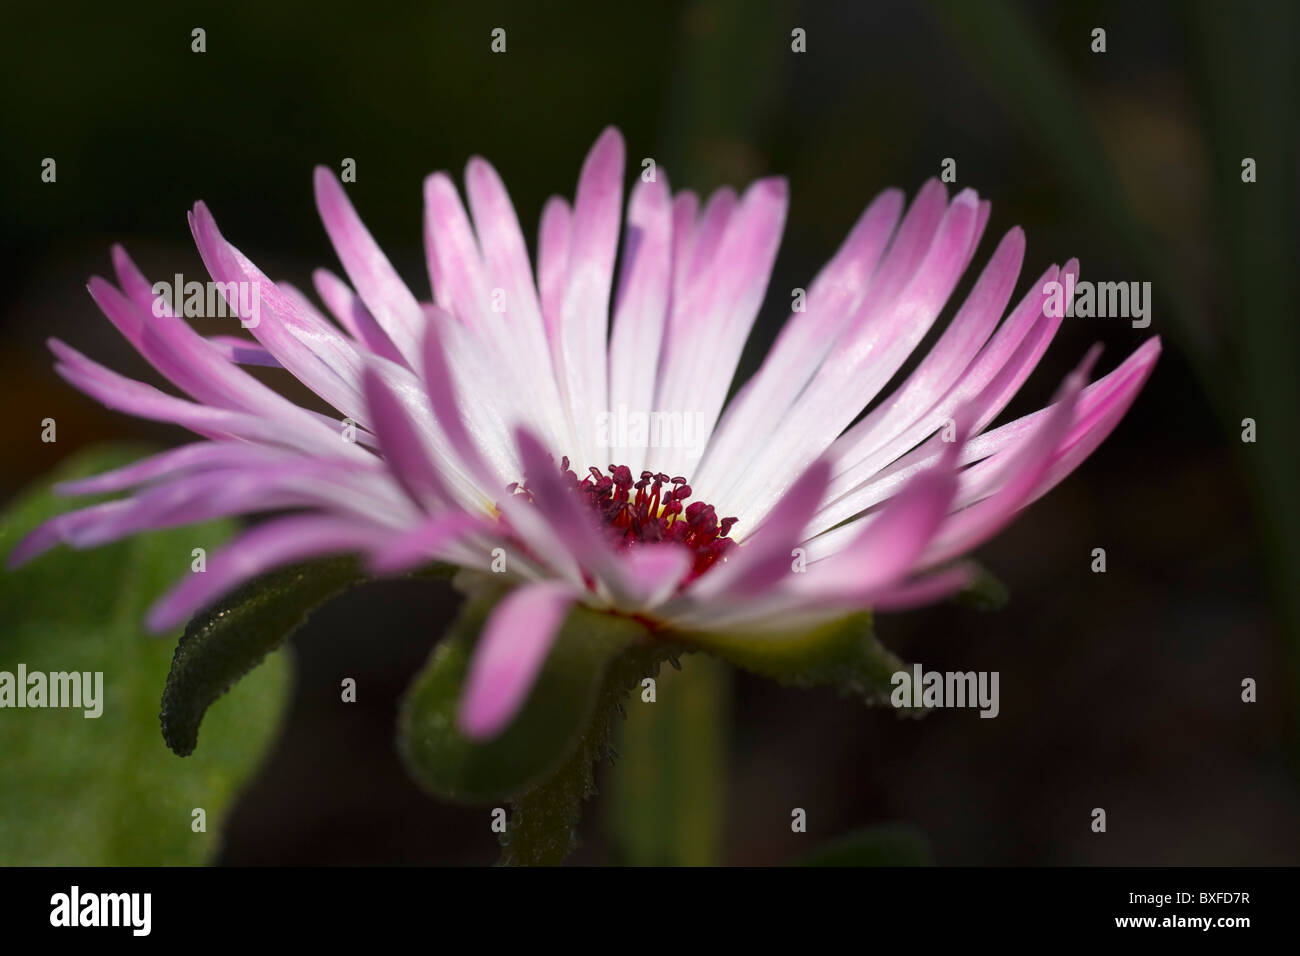 Pink and white Lampranthus flower. Family: Aizoaceae, Genus: Lampranthus. South Africa. Stock Photo